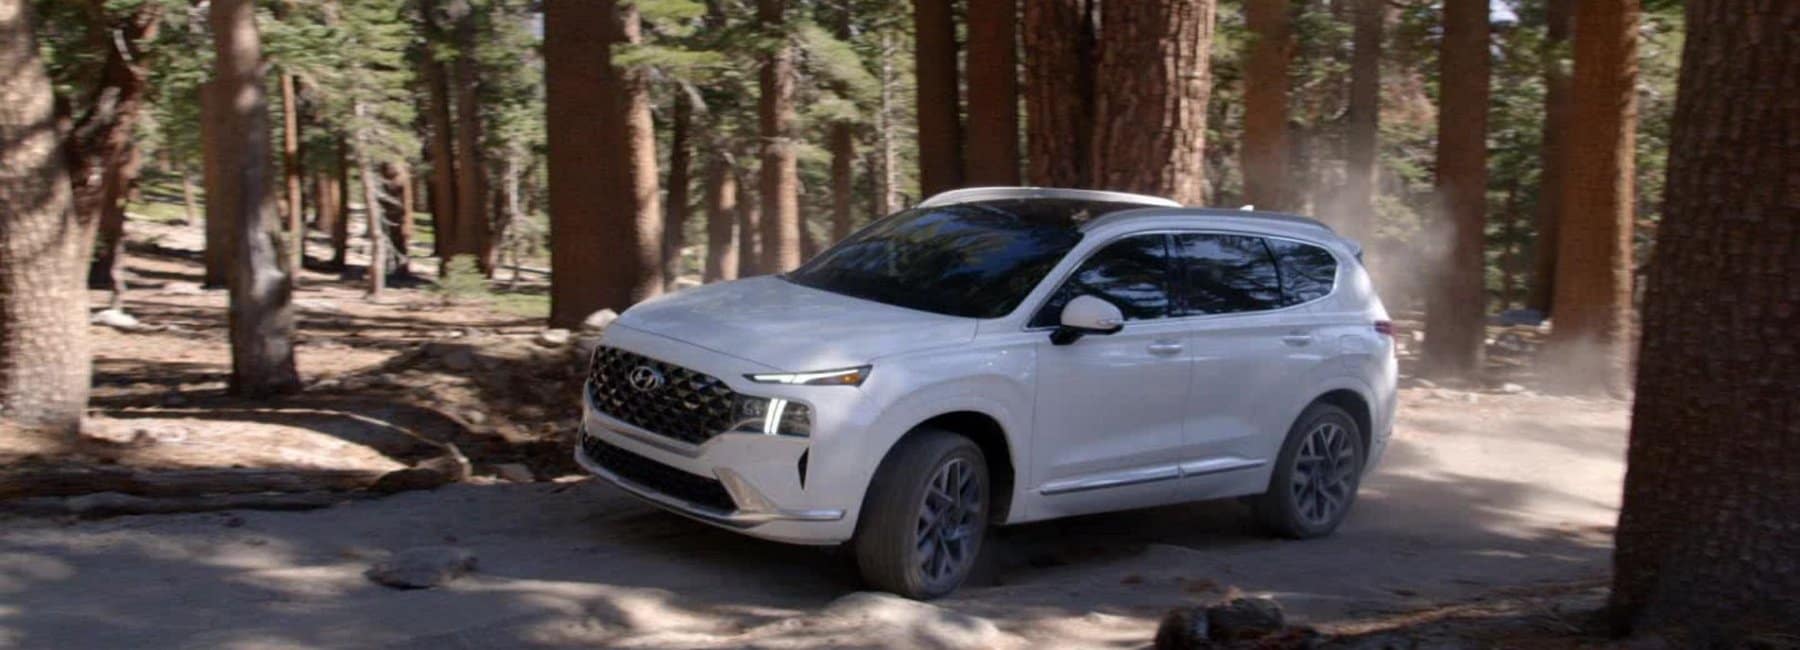 2022santafe-side-angleview-driving-through-forest-white